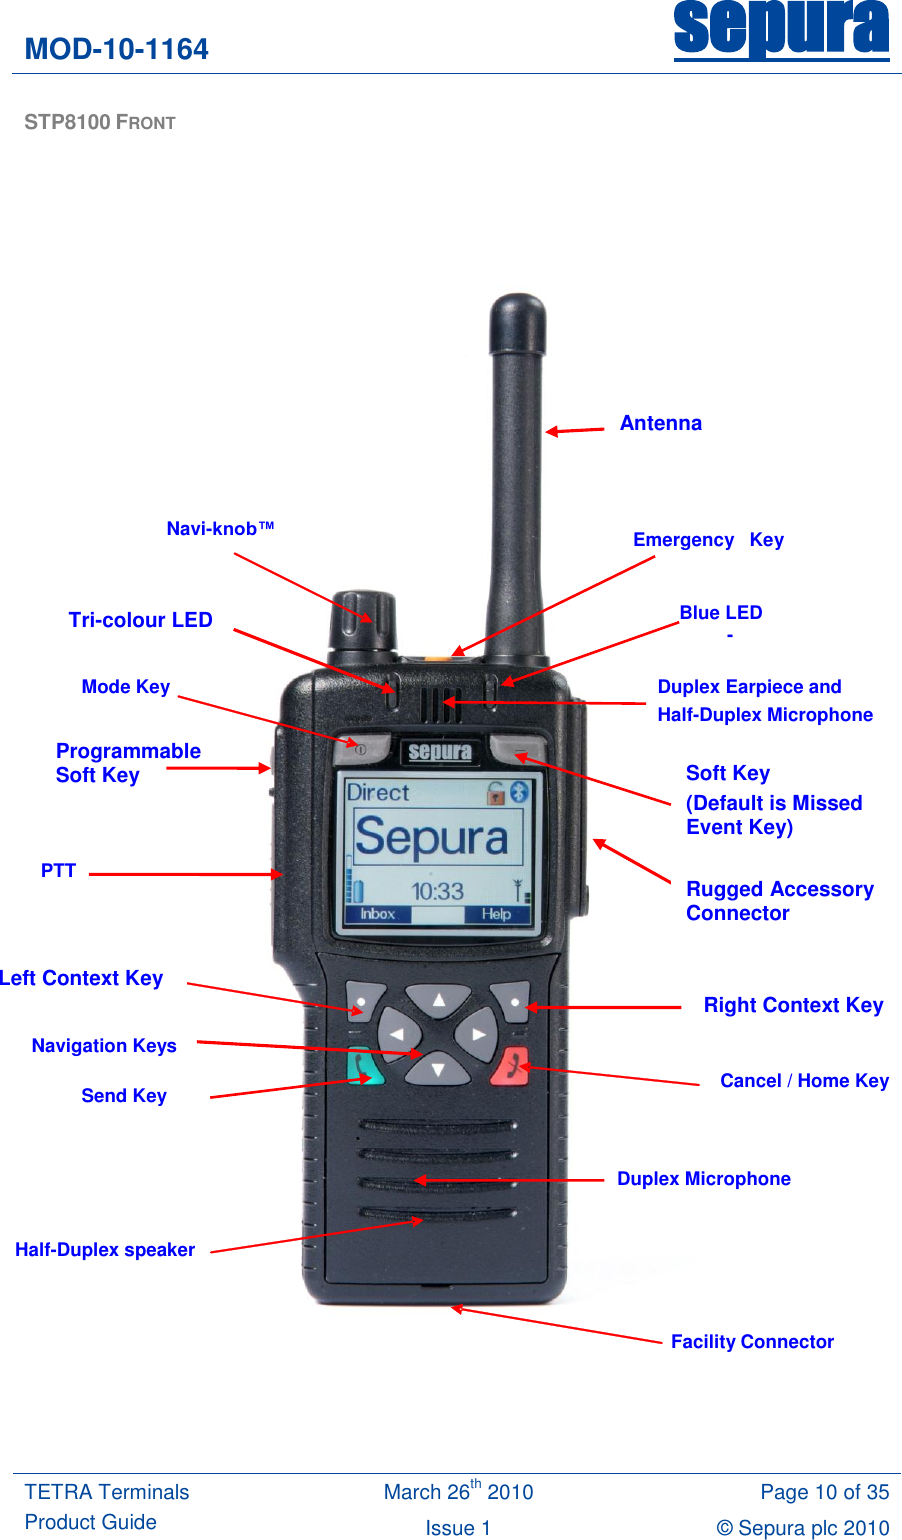 MOD-10-1164 sepura  TETRA Terminals Product Guide March 26th 2010 Page 10 of 35 Issue 1 © Sepura plc 2010   STP8100 FRONT  Emergency   Key  Navi-knob™  Mode Key PTT  Navigation Keys Send Key Duplex Earpiece and  Half-Duplex Microphone    -  Cancel / Home Key   Half-Duplex speaker  Facility Connector Duplex Microphone - Blue LED Antenna Left Context Key Right Context Key Programmable Soft Key  Tri-colour LED Soft Key (Default is Missed Event Key) Rugged Accessory Connector 